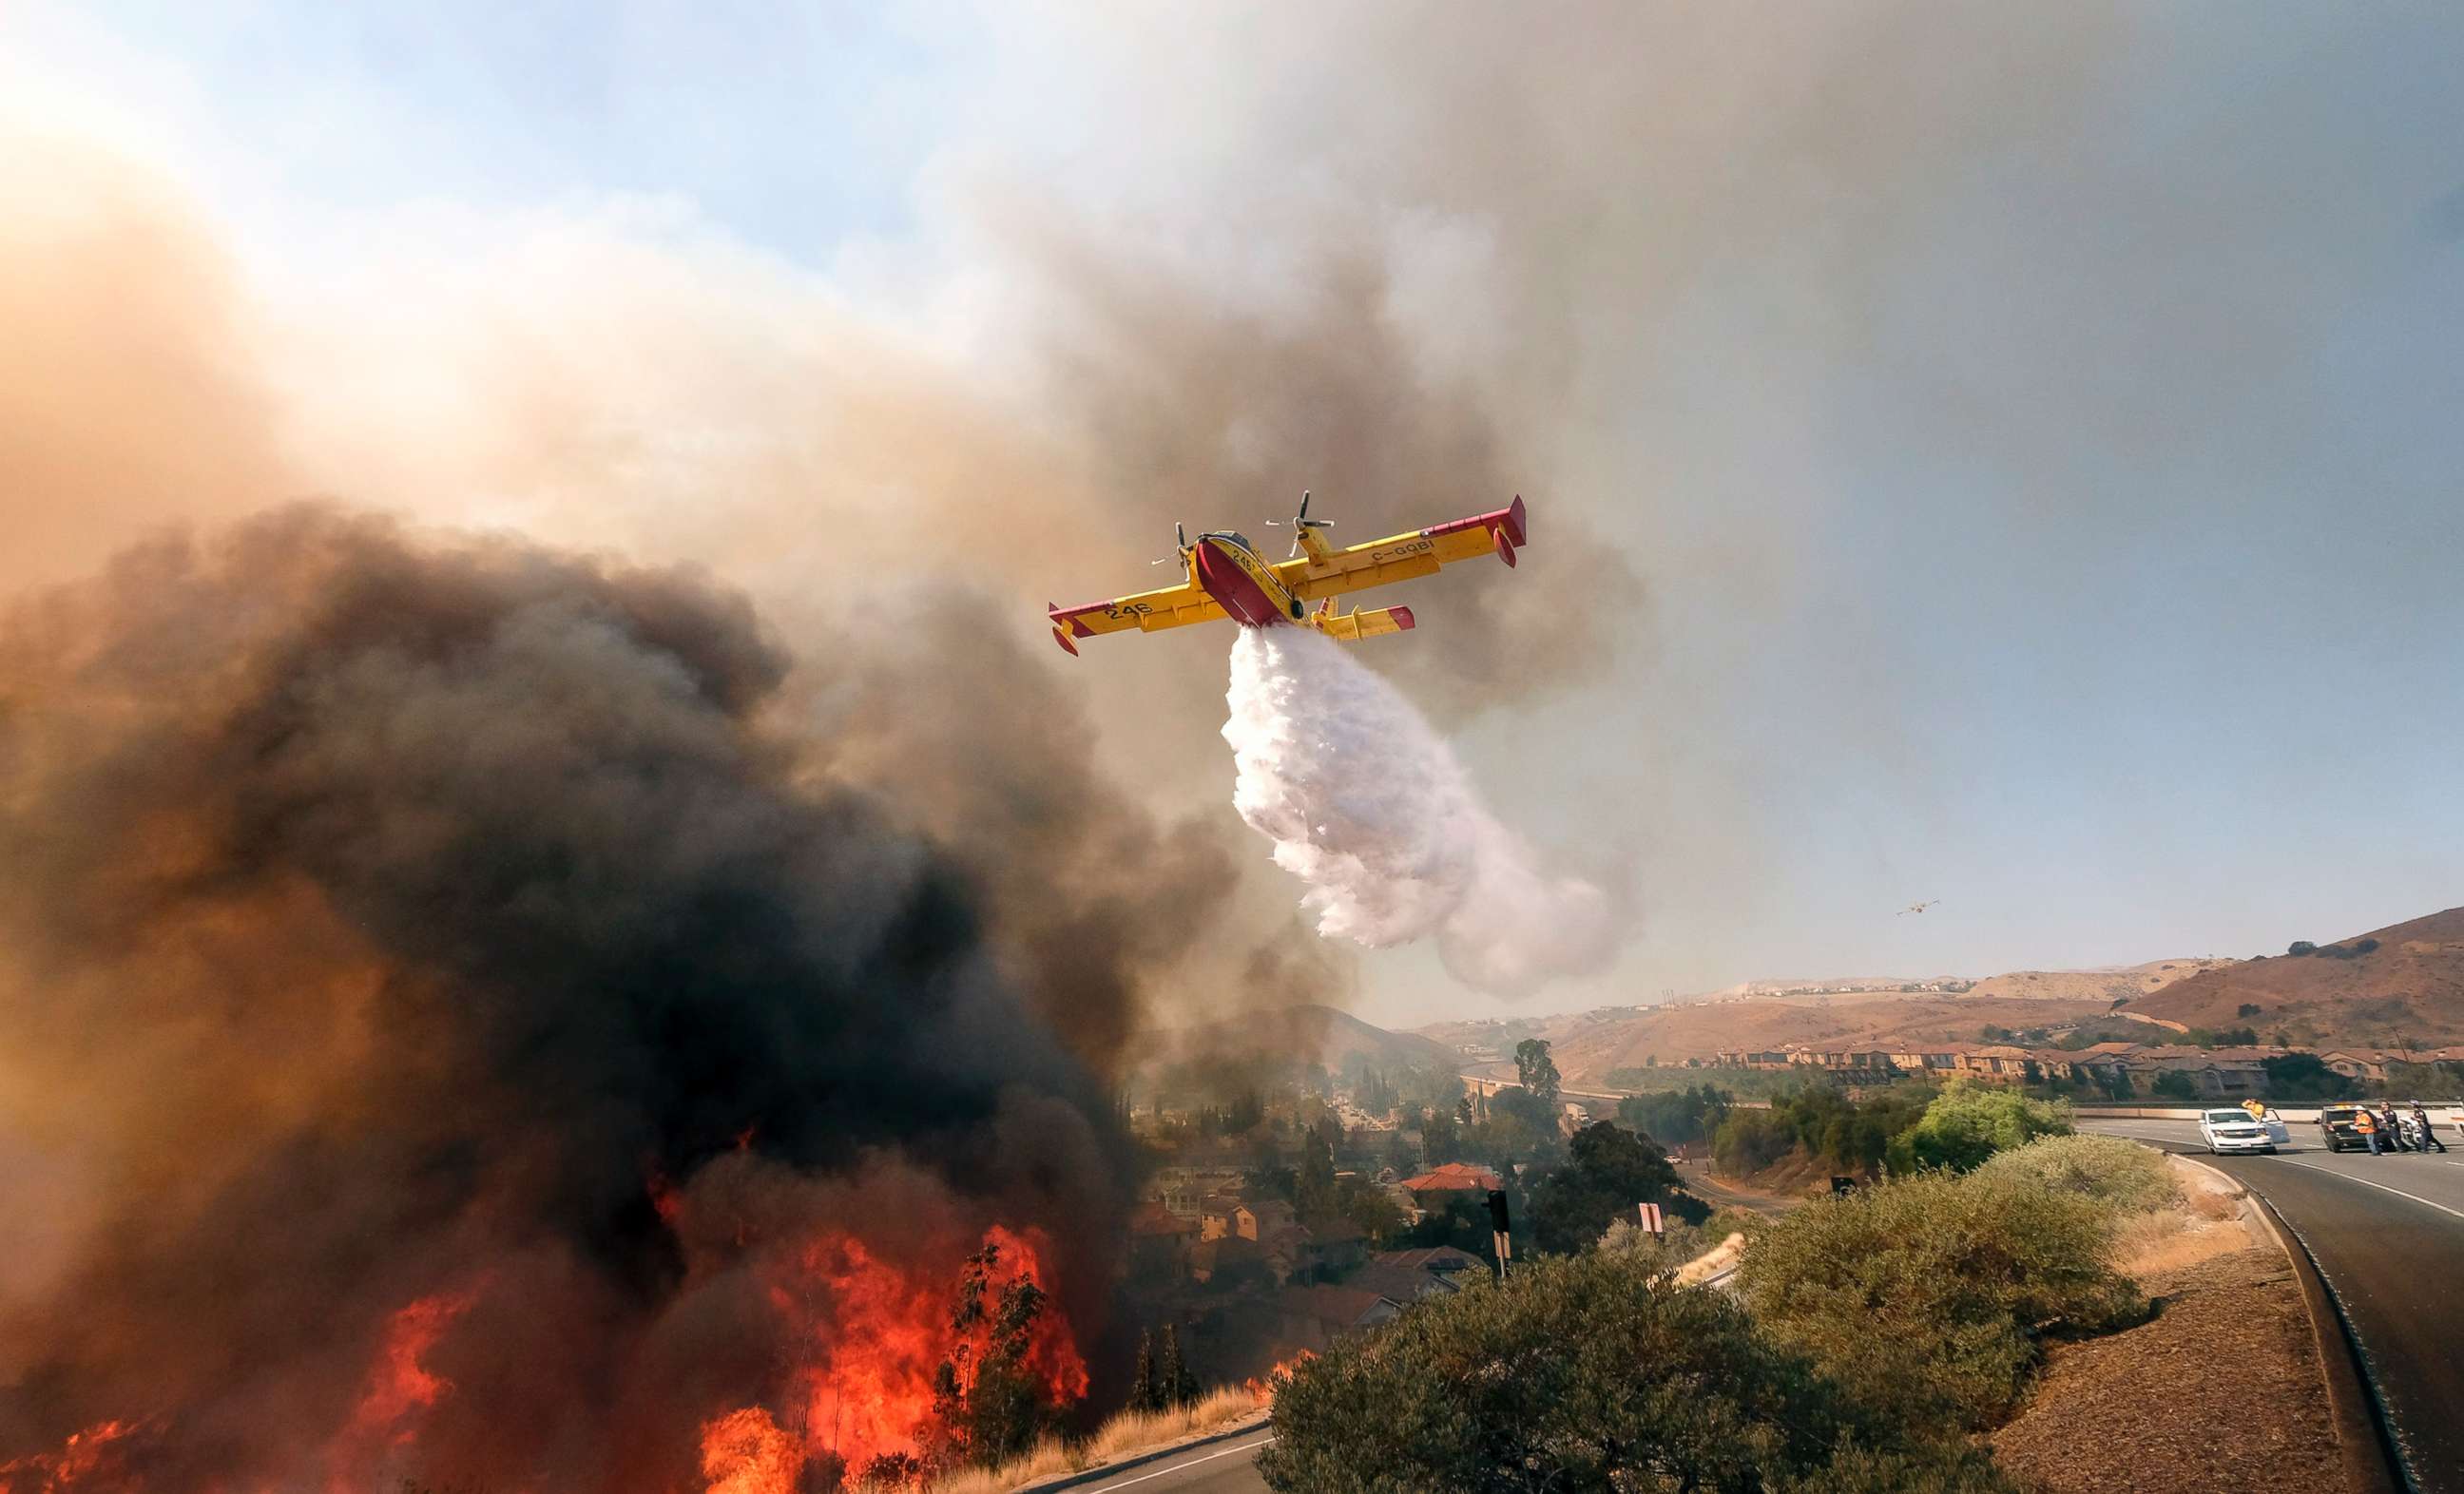 PHOTO: An air tanker drops water on a fire along the Ronald Reagan (118) Freeway in Simi Valley, Calif., Nov. 12, 2018.